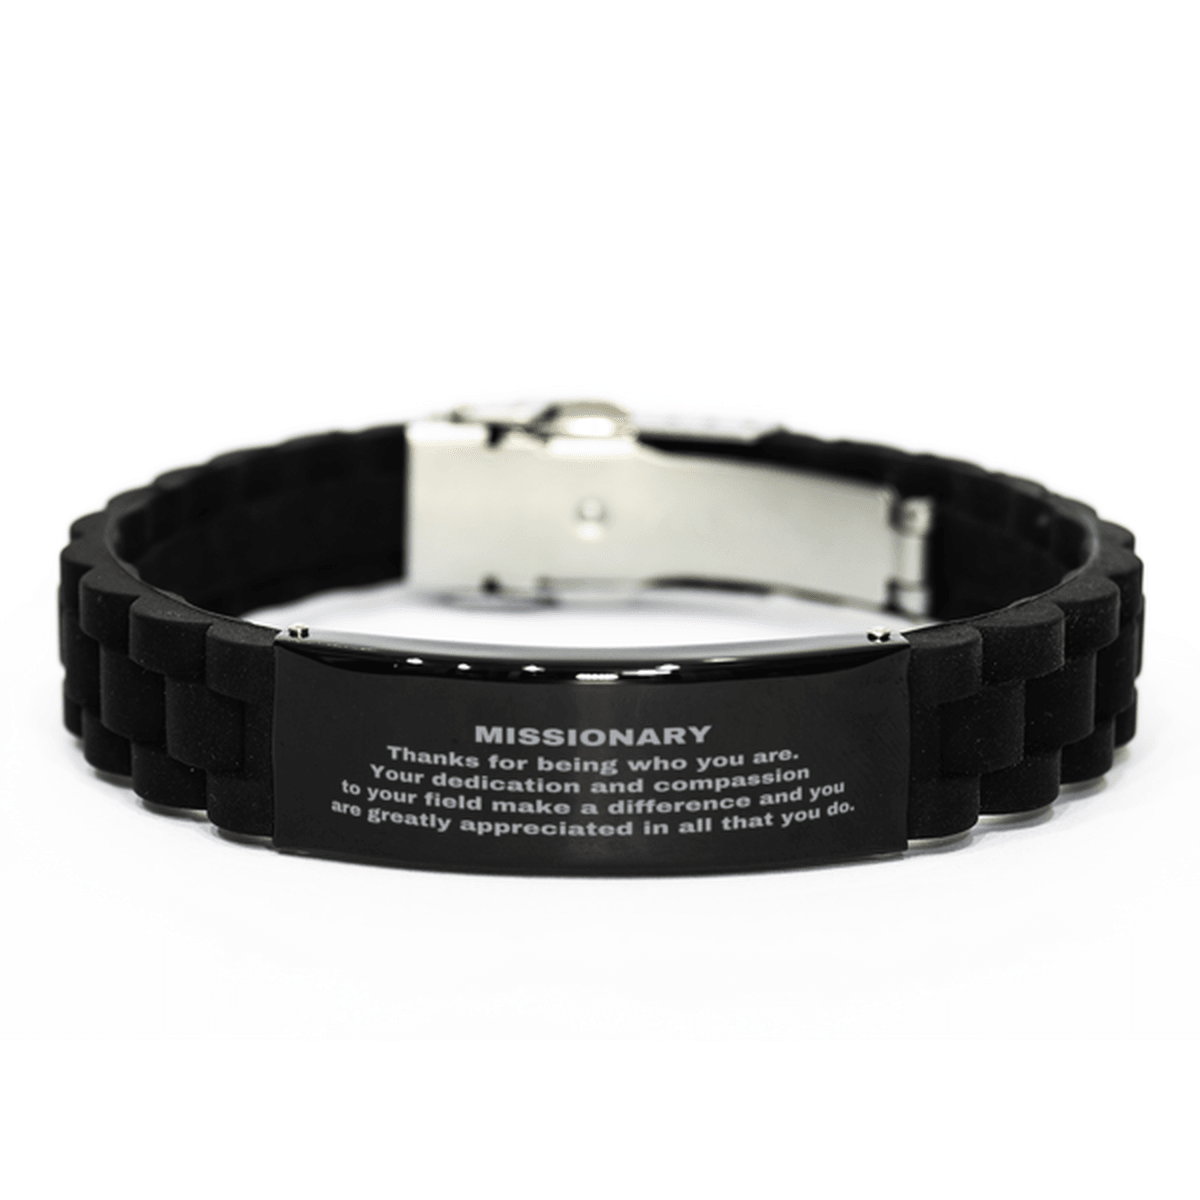 Missionary Black Glidelock Clasp Engraved Bracelet - Thanks for being who you are - Birthday Christmas Jewelry Gifts Coworkers Colleague Boss